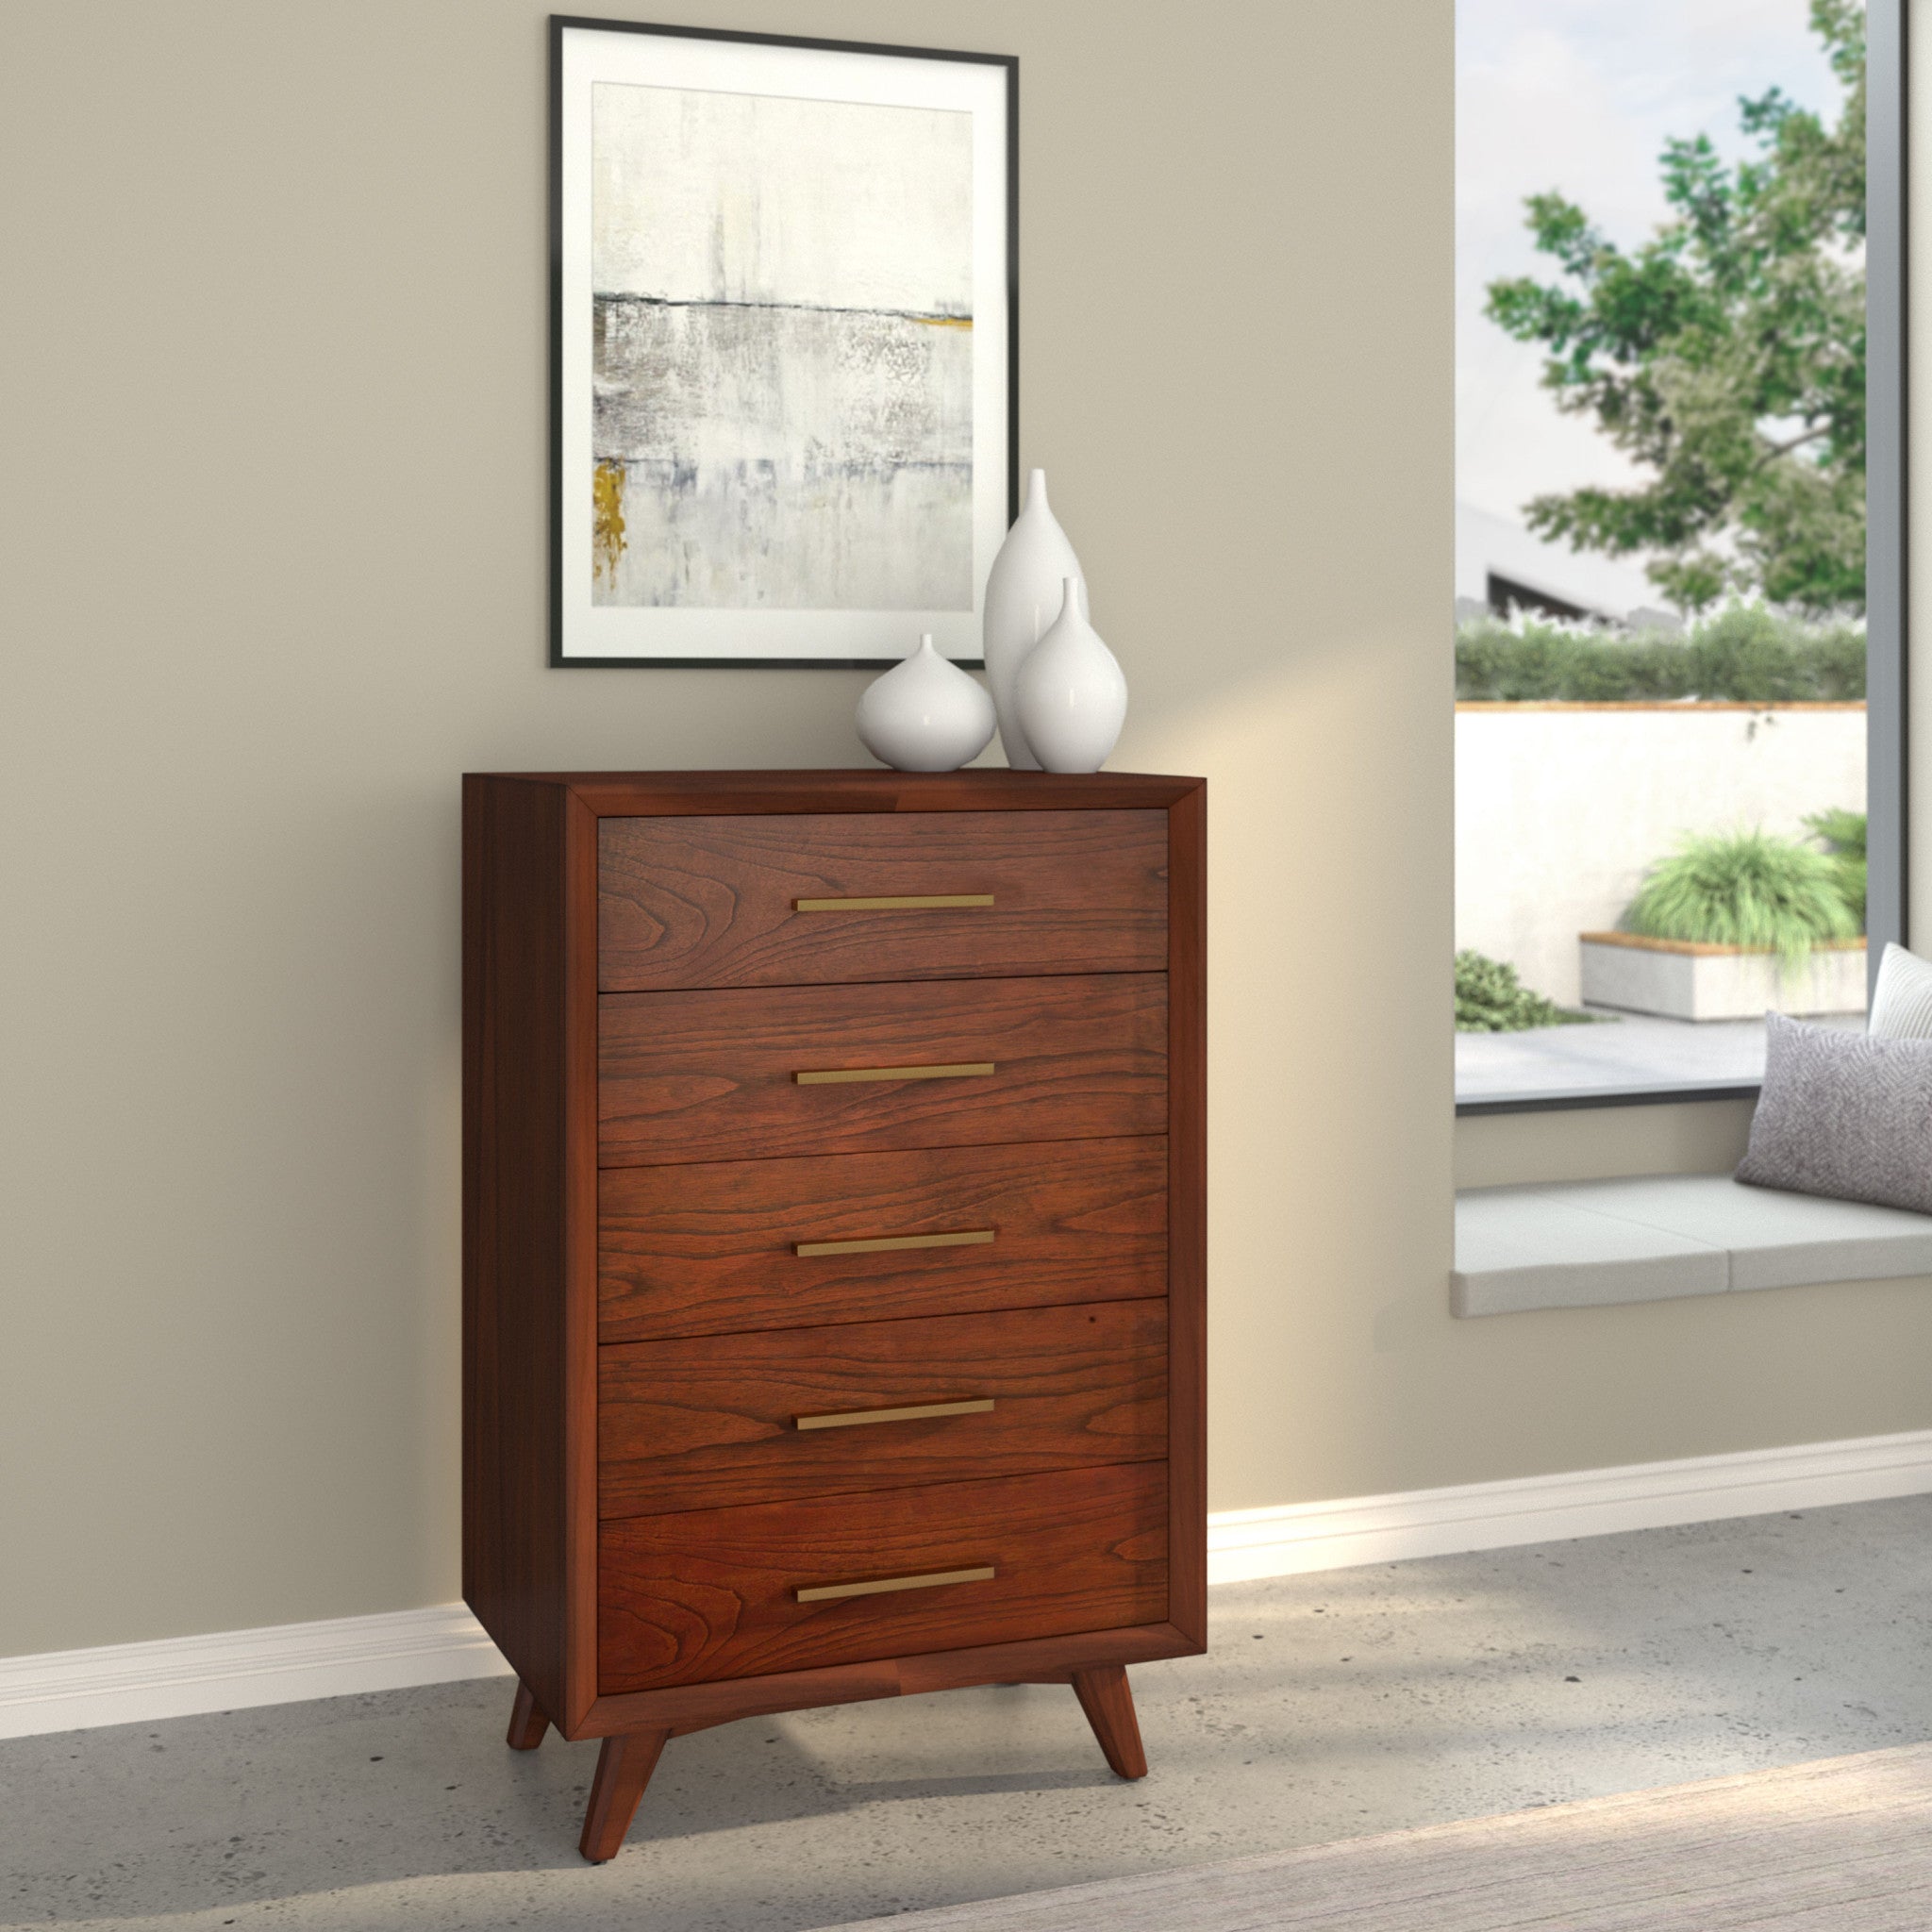 28" Walnut Solid Wood Five Drawer Chest